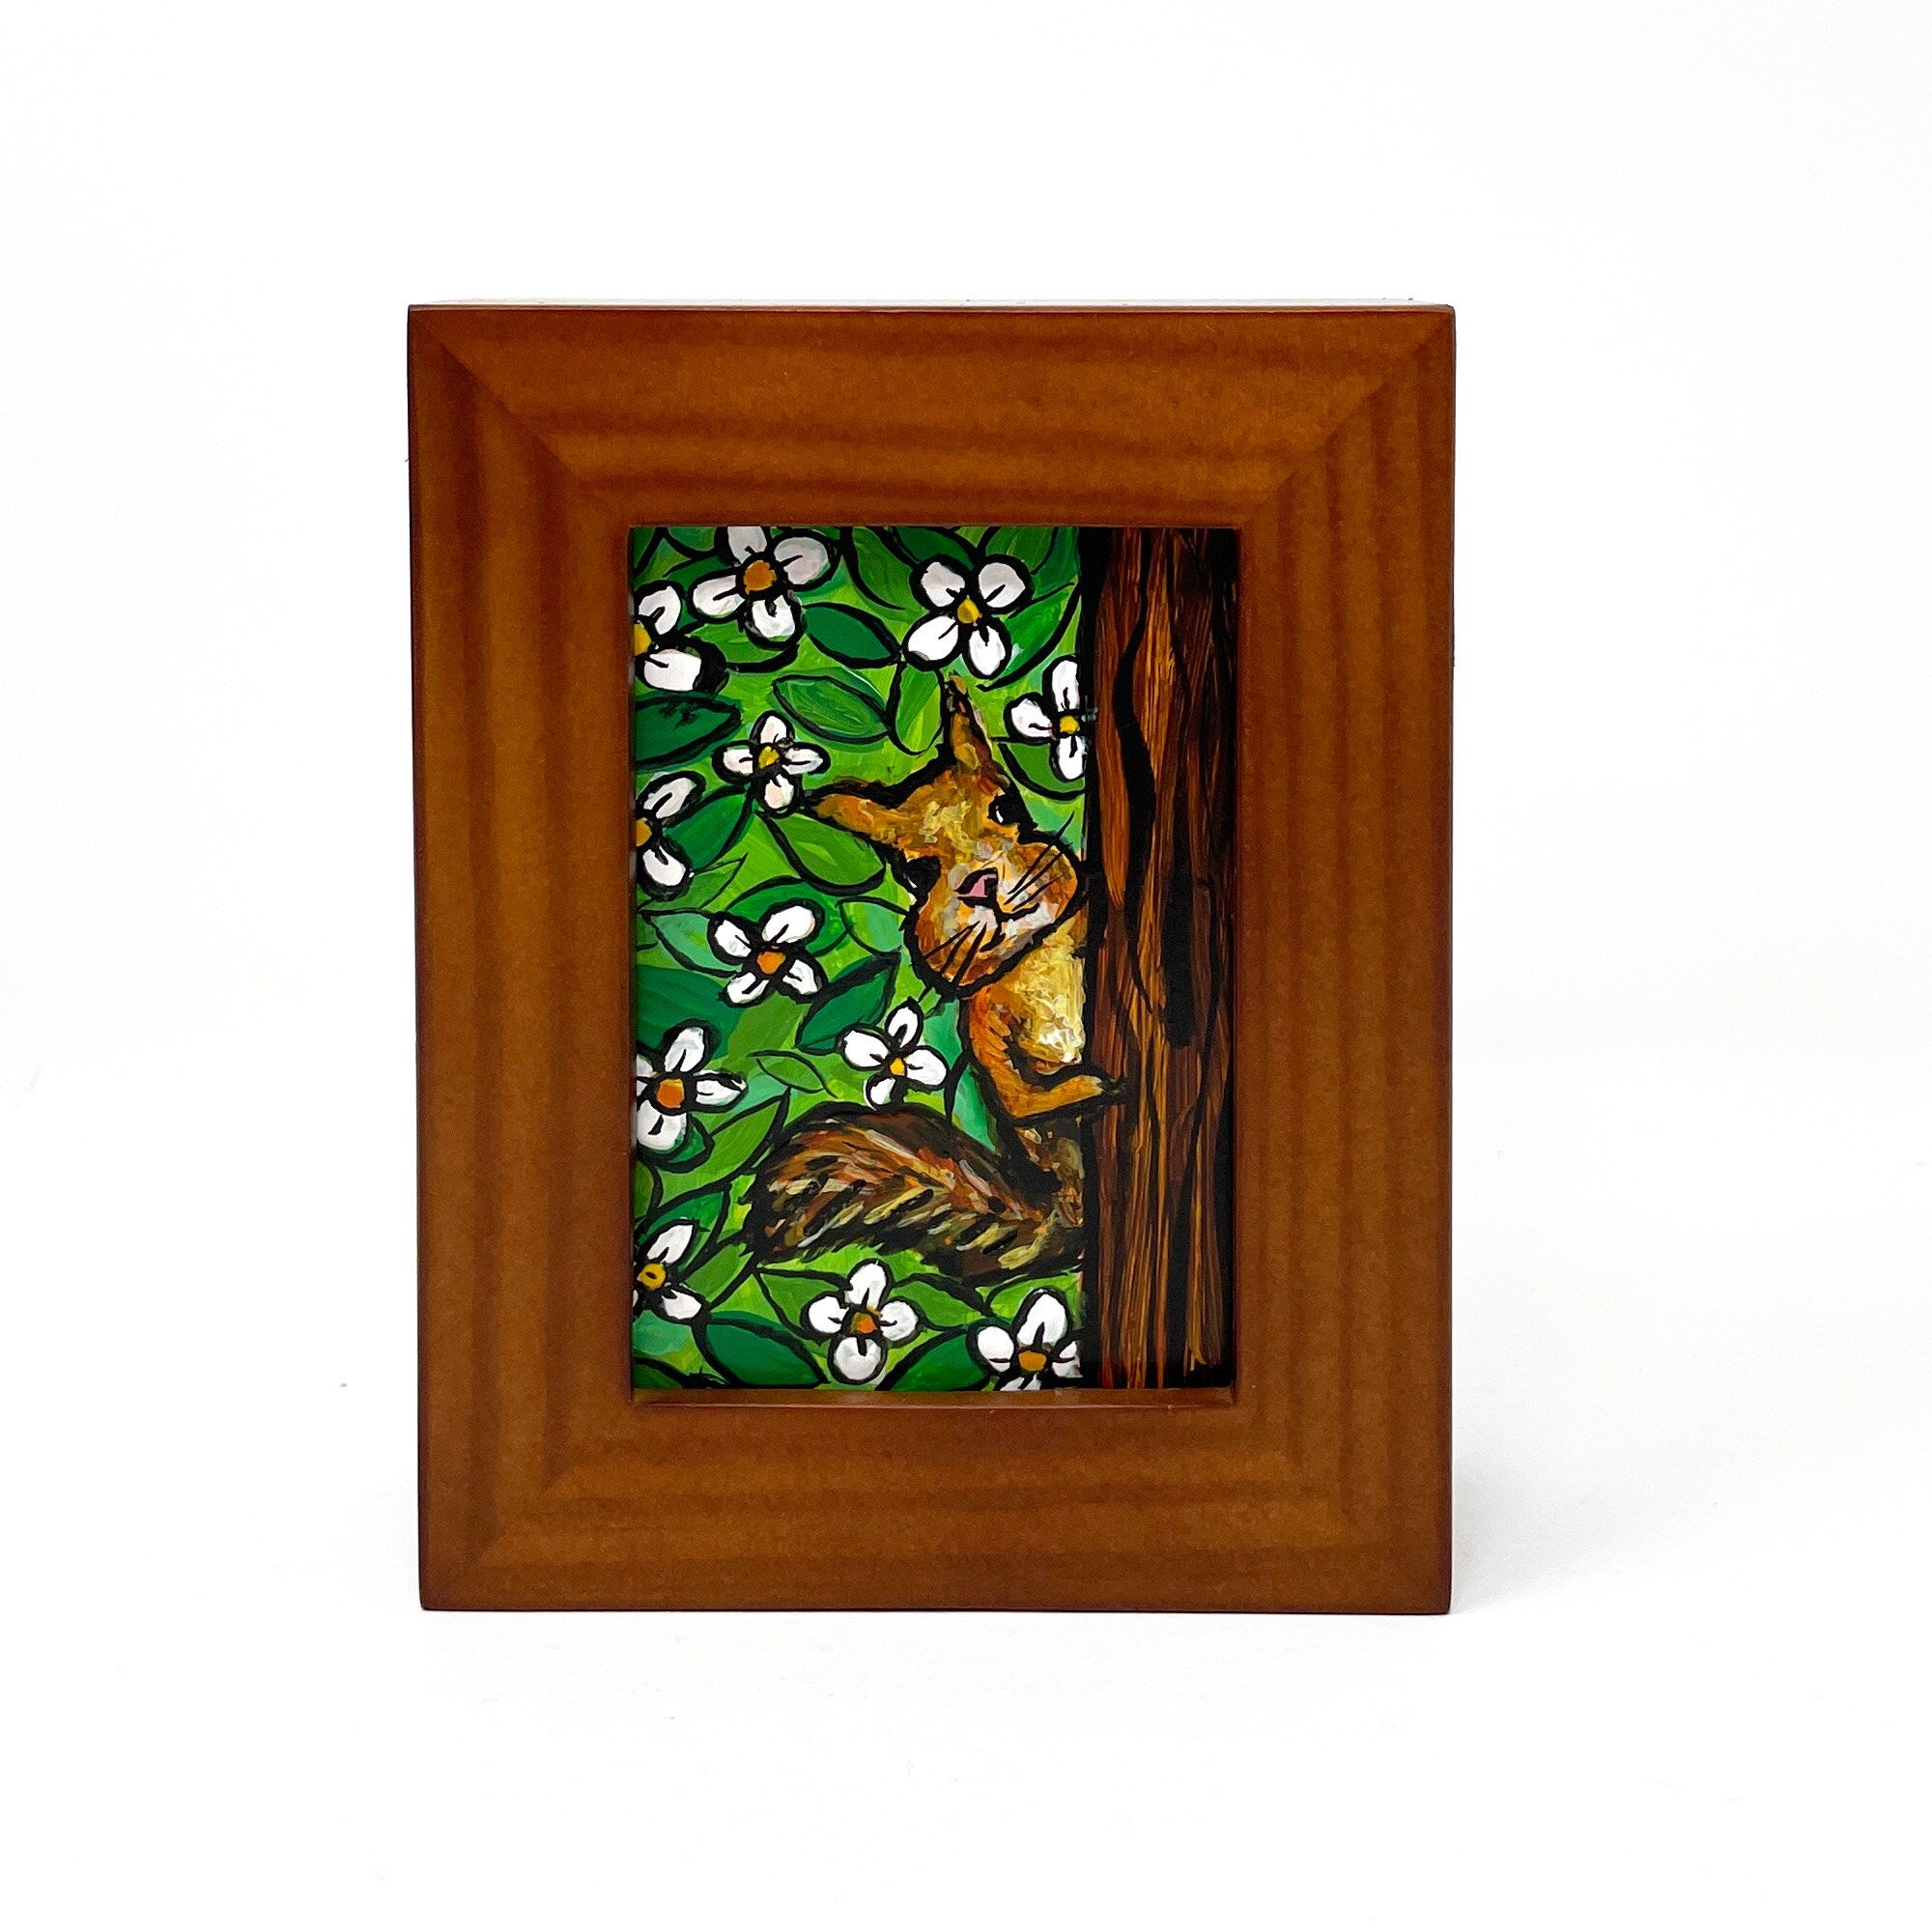 Mini squirrel painting in wood frame on white background. Painting shows squirrel peeking behind a tree at the viewer. Background is white flowers and green leaves.